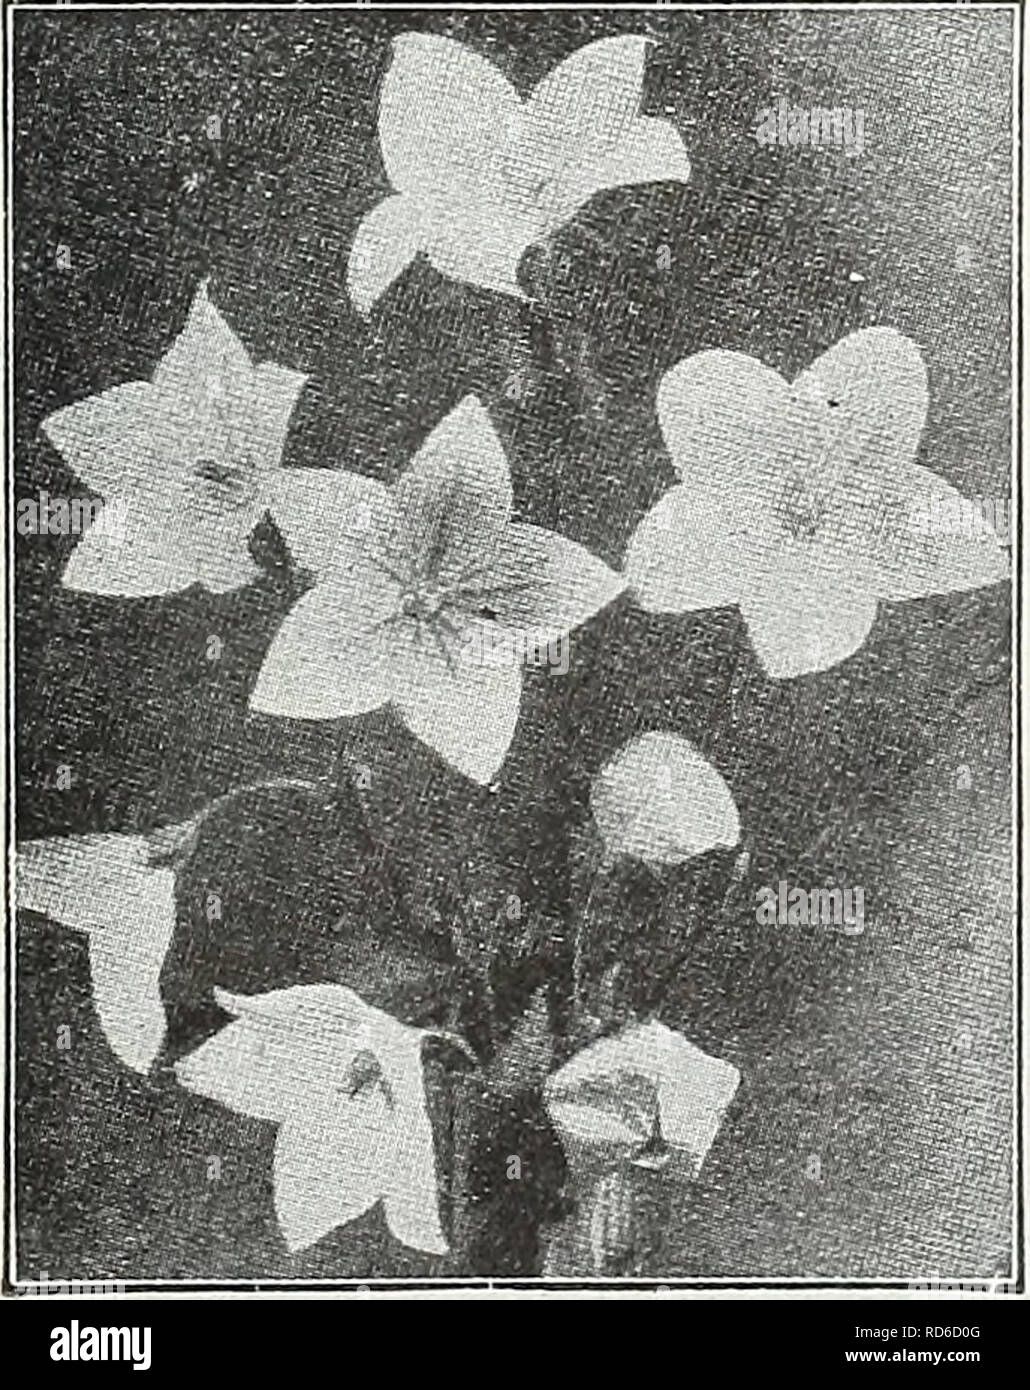 . Currie's garden annual : spring 1931 56th year. Flowers Seeds Catalogs; Bulbs (Plants) Seeds Catalogs; Vegetables Seeds Catalogs; Nurseries (Horticulture) Catalogs; Plants, Ornamental Catalogs; Gardening Equipment and supplies Catalogs. ^^m  OENOTHERA (EVENING PRIMROSE) Free flowering, hardy plants, the flowers opening towards evening and early morning. Pkt. Lamarckiana-—Bears spikes of large bright yellow flowers profusely. Hardy peren- nial, but blooms the first year from early sown seed. Height, 4 feet $0.10 Giant America—This Moonflower Macrocarpa dwarf yellow striking variety, as white  Stock Photo